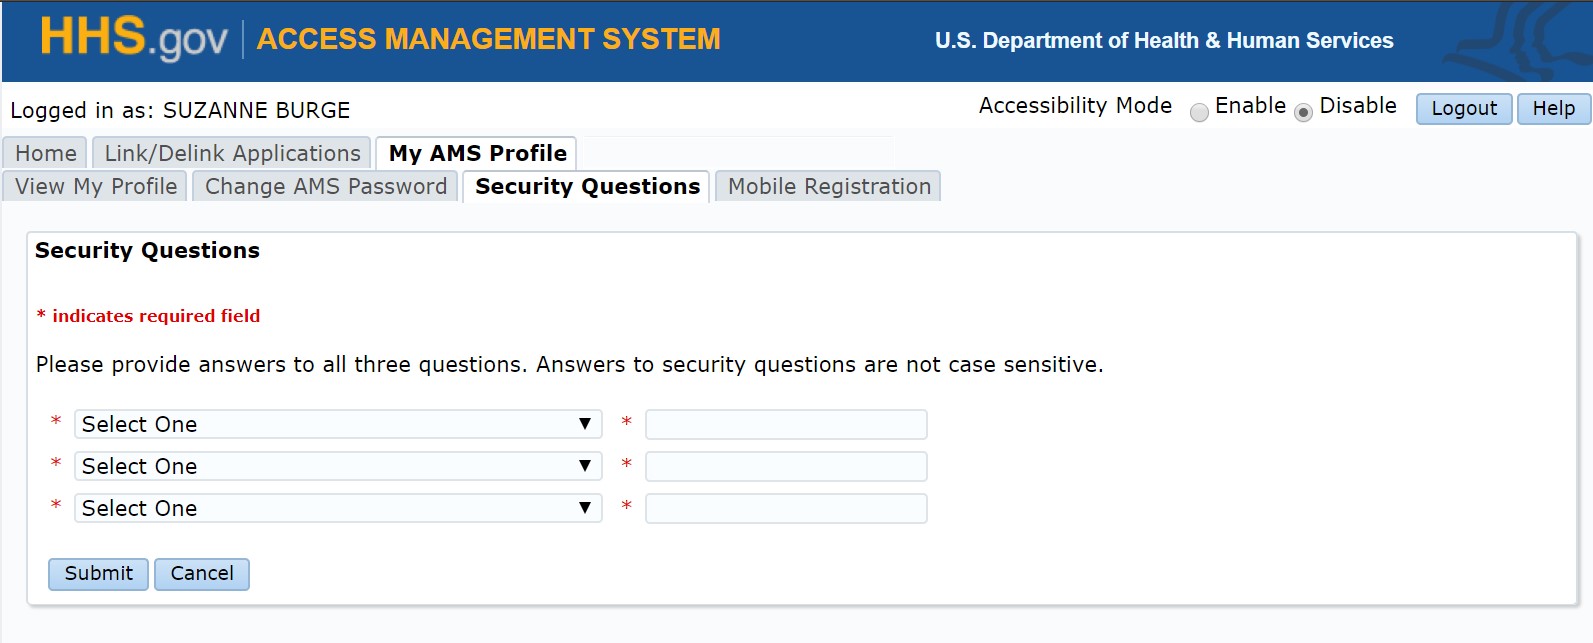 Security Questions tab displaying questions and answers